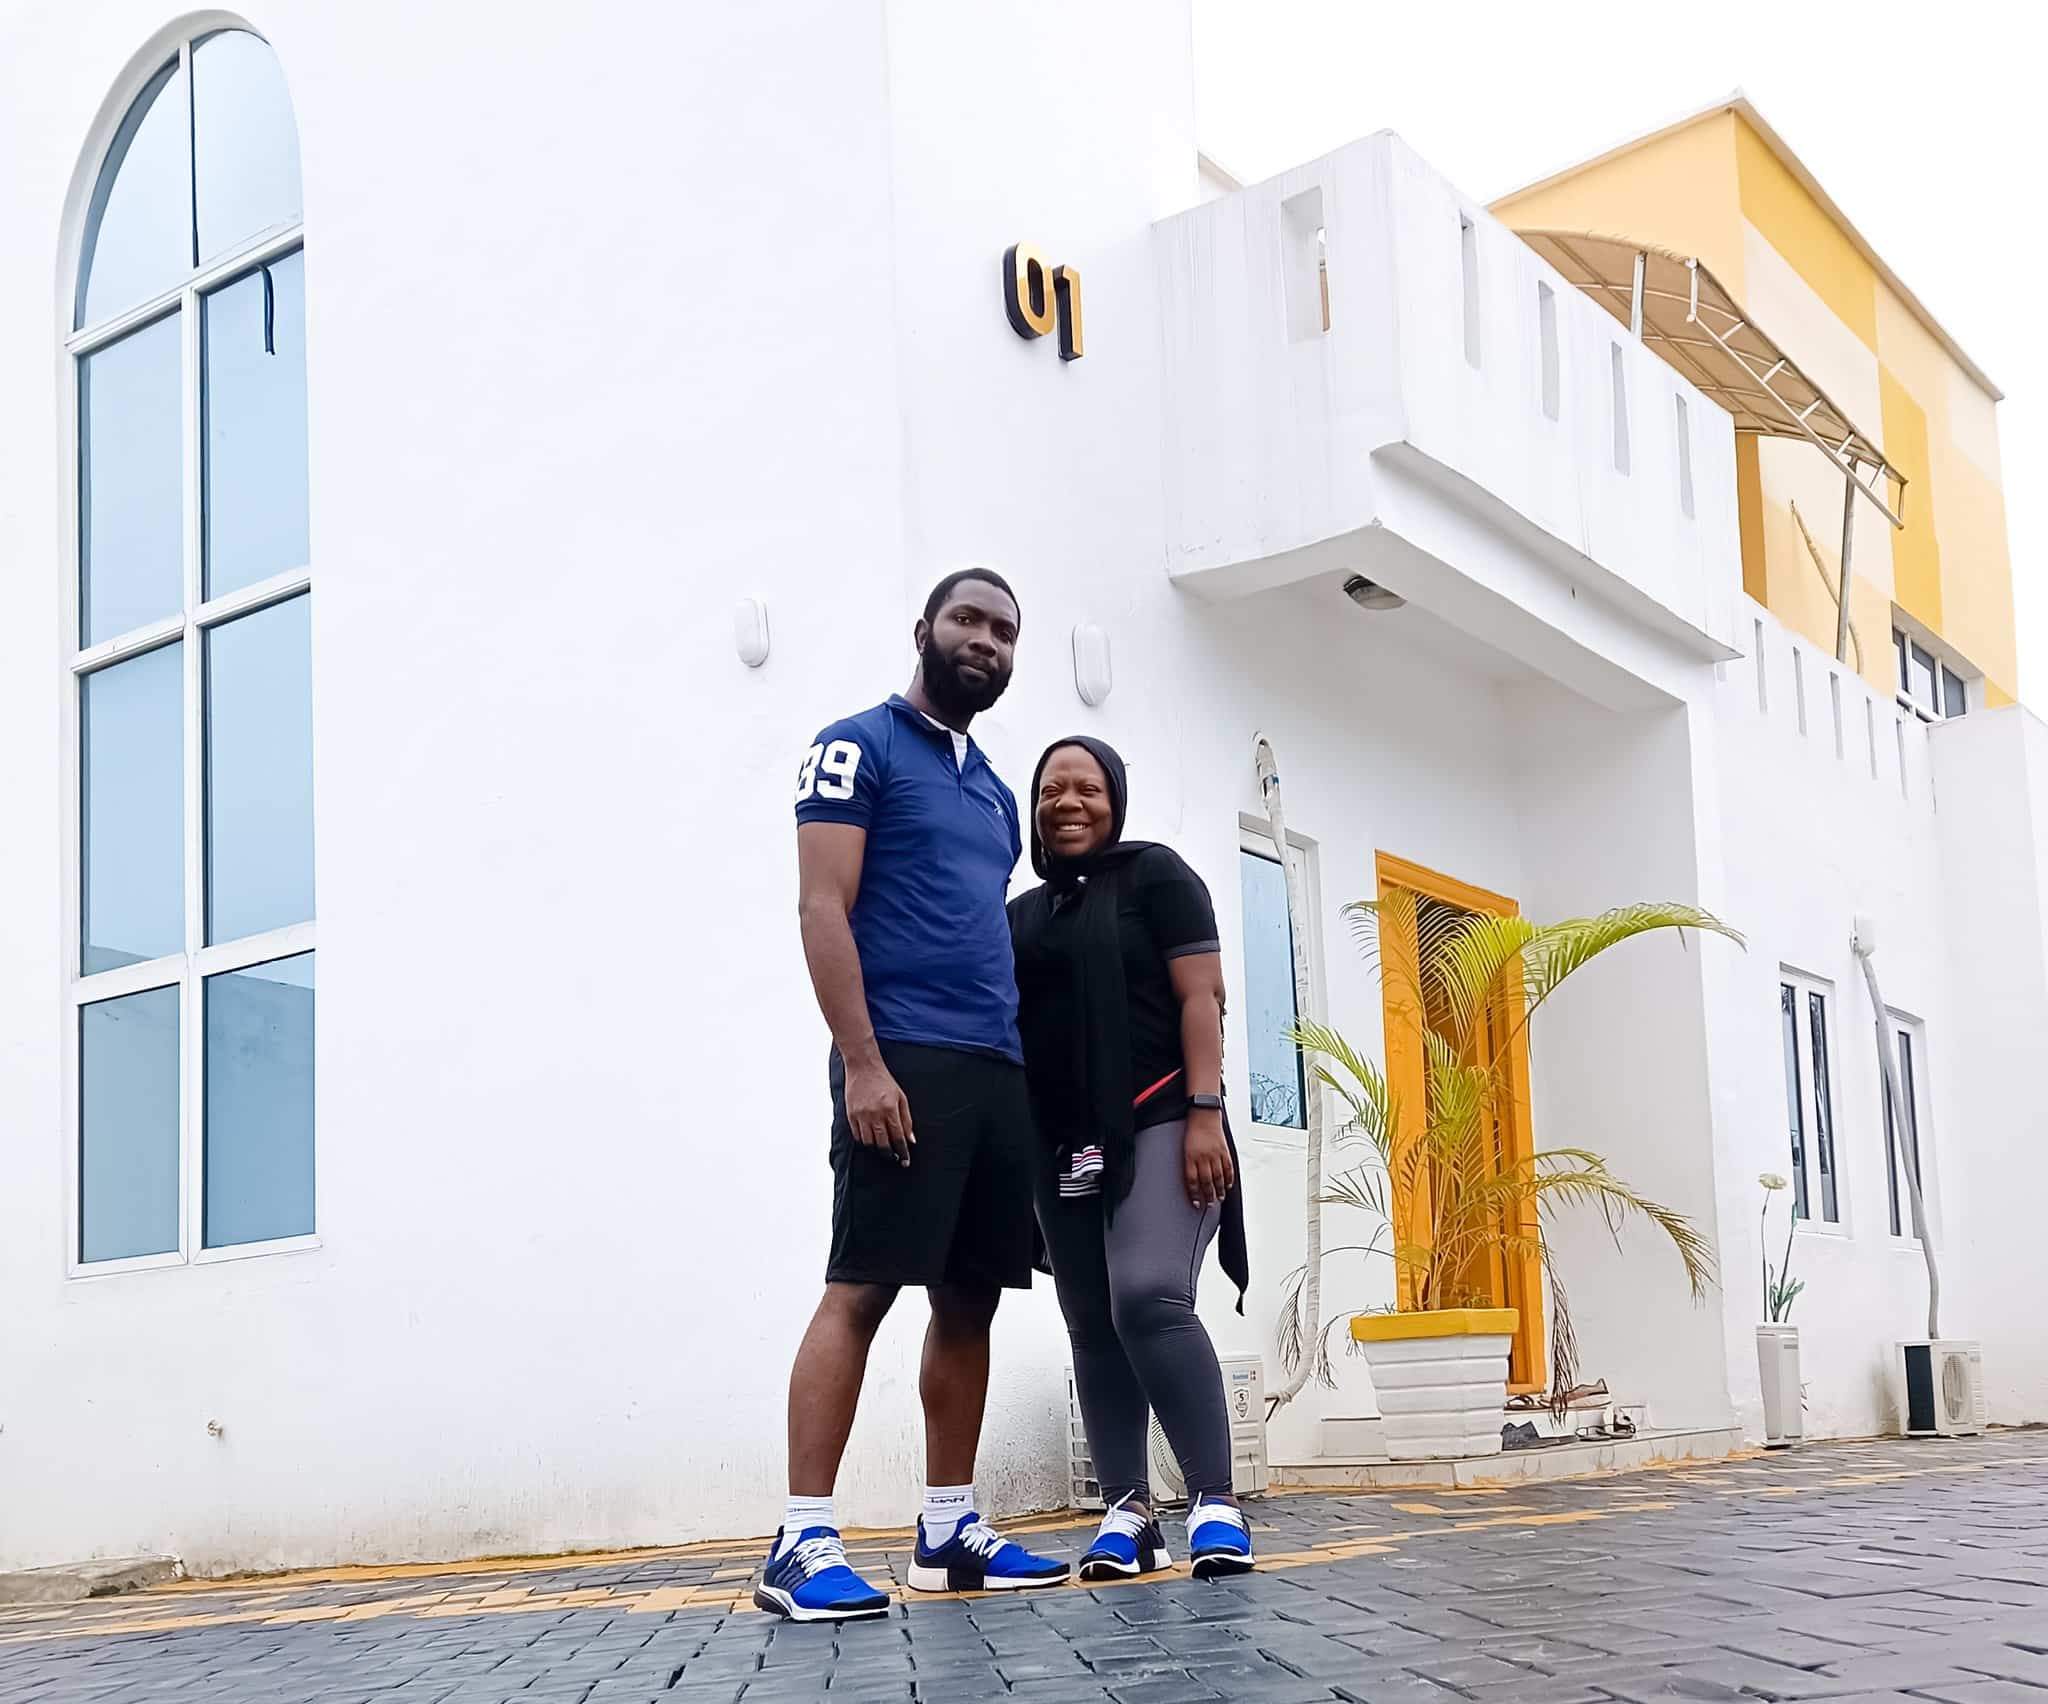 Abroad-based man makes it big after returning to Nigeria with his wife